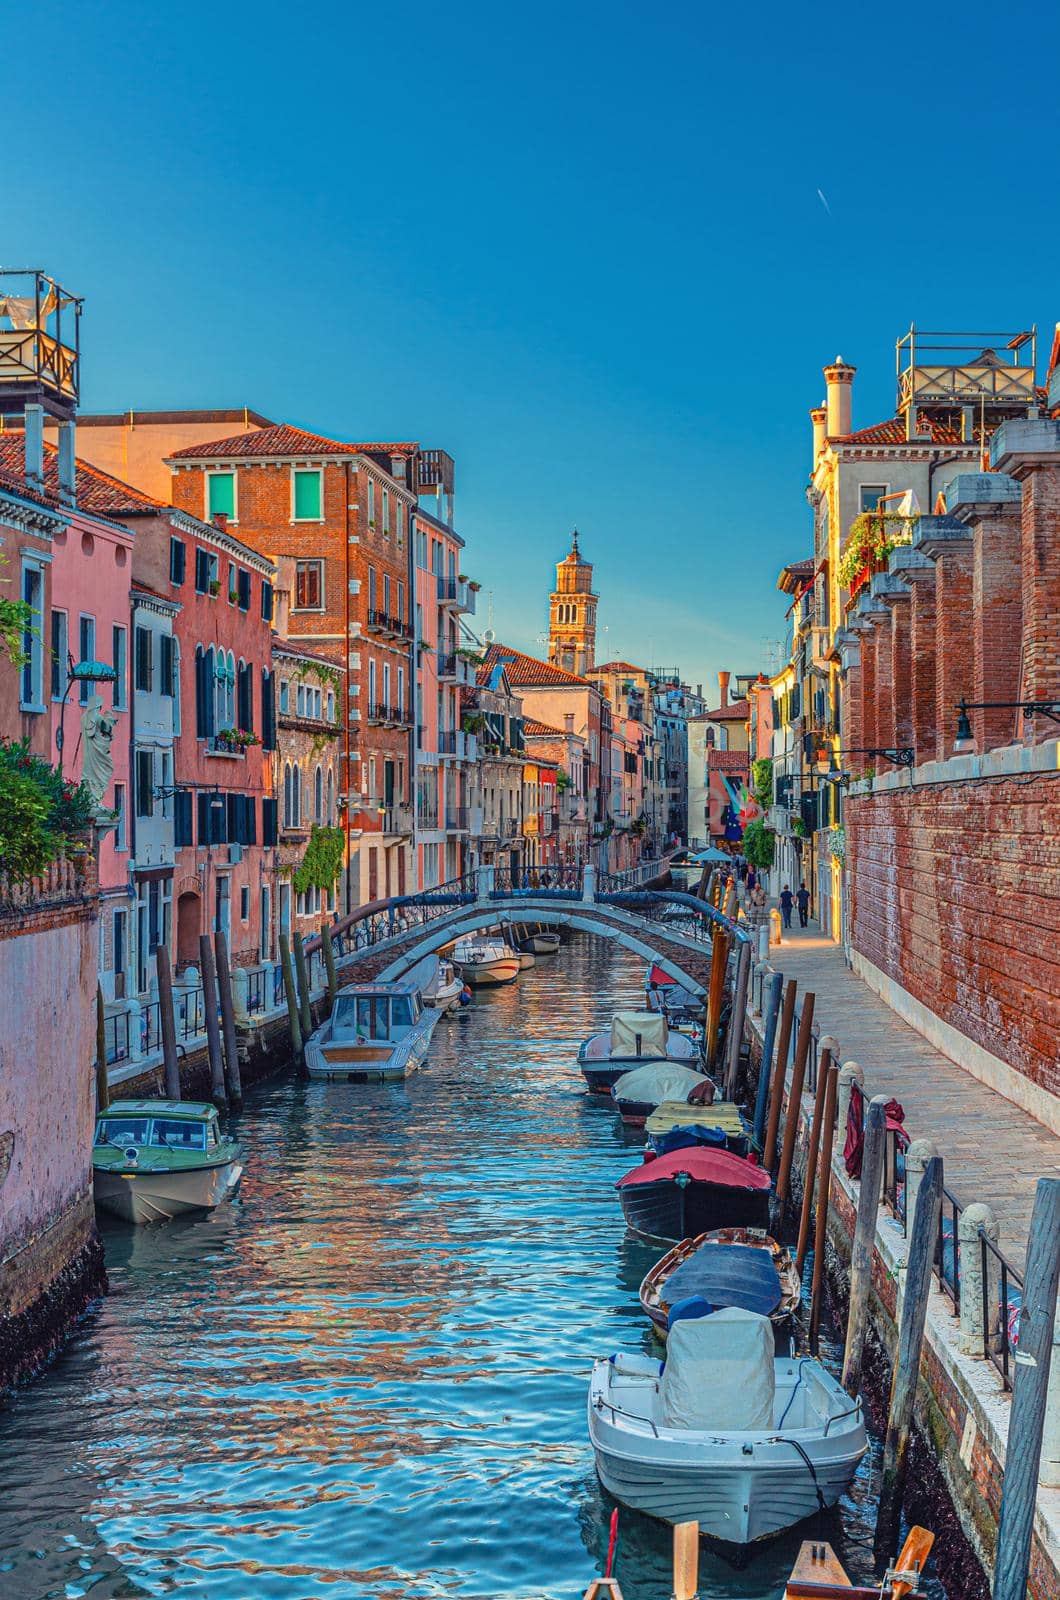 Venice cityscape with narrow water canal and colorful boats moored near fondamenta embankment, Veneto Region, Northern Italy. Typical Venetian view at sunset, vertical view, blue sky background